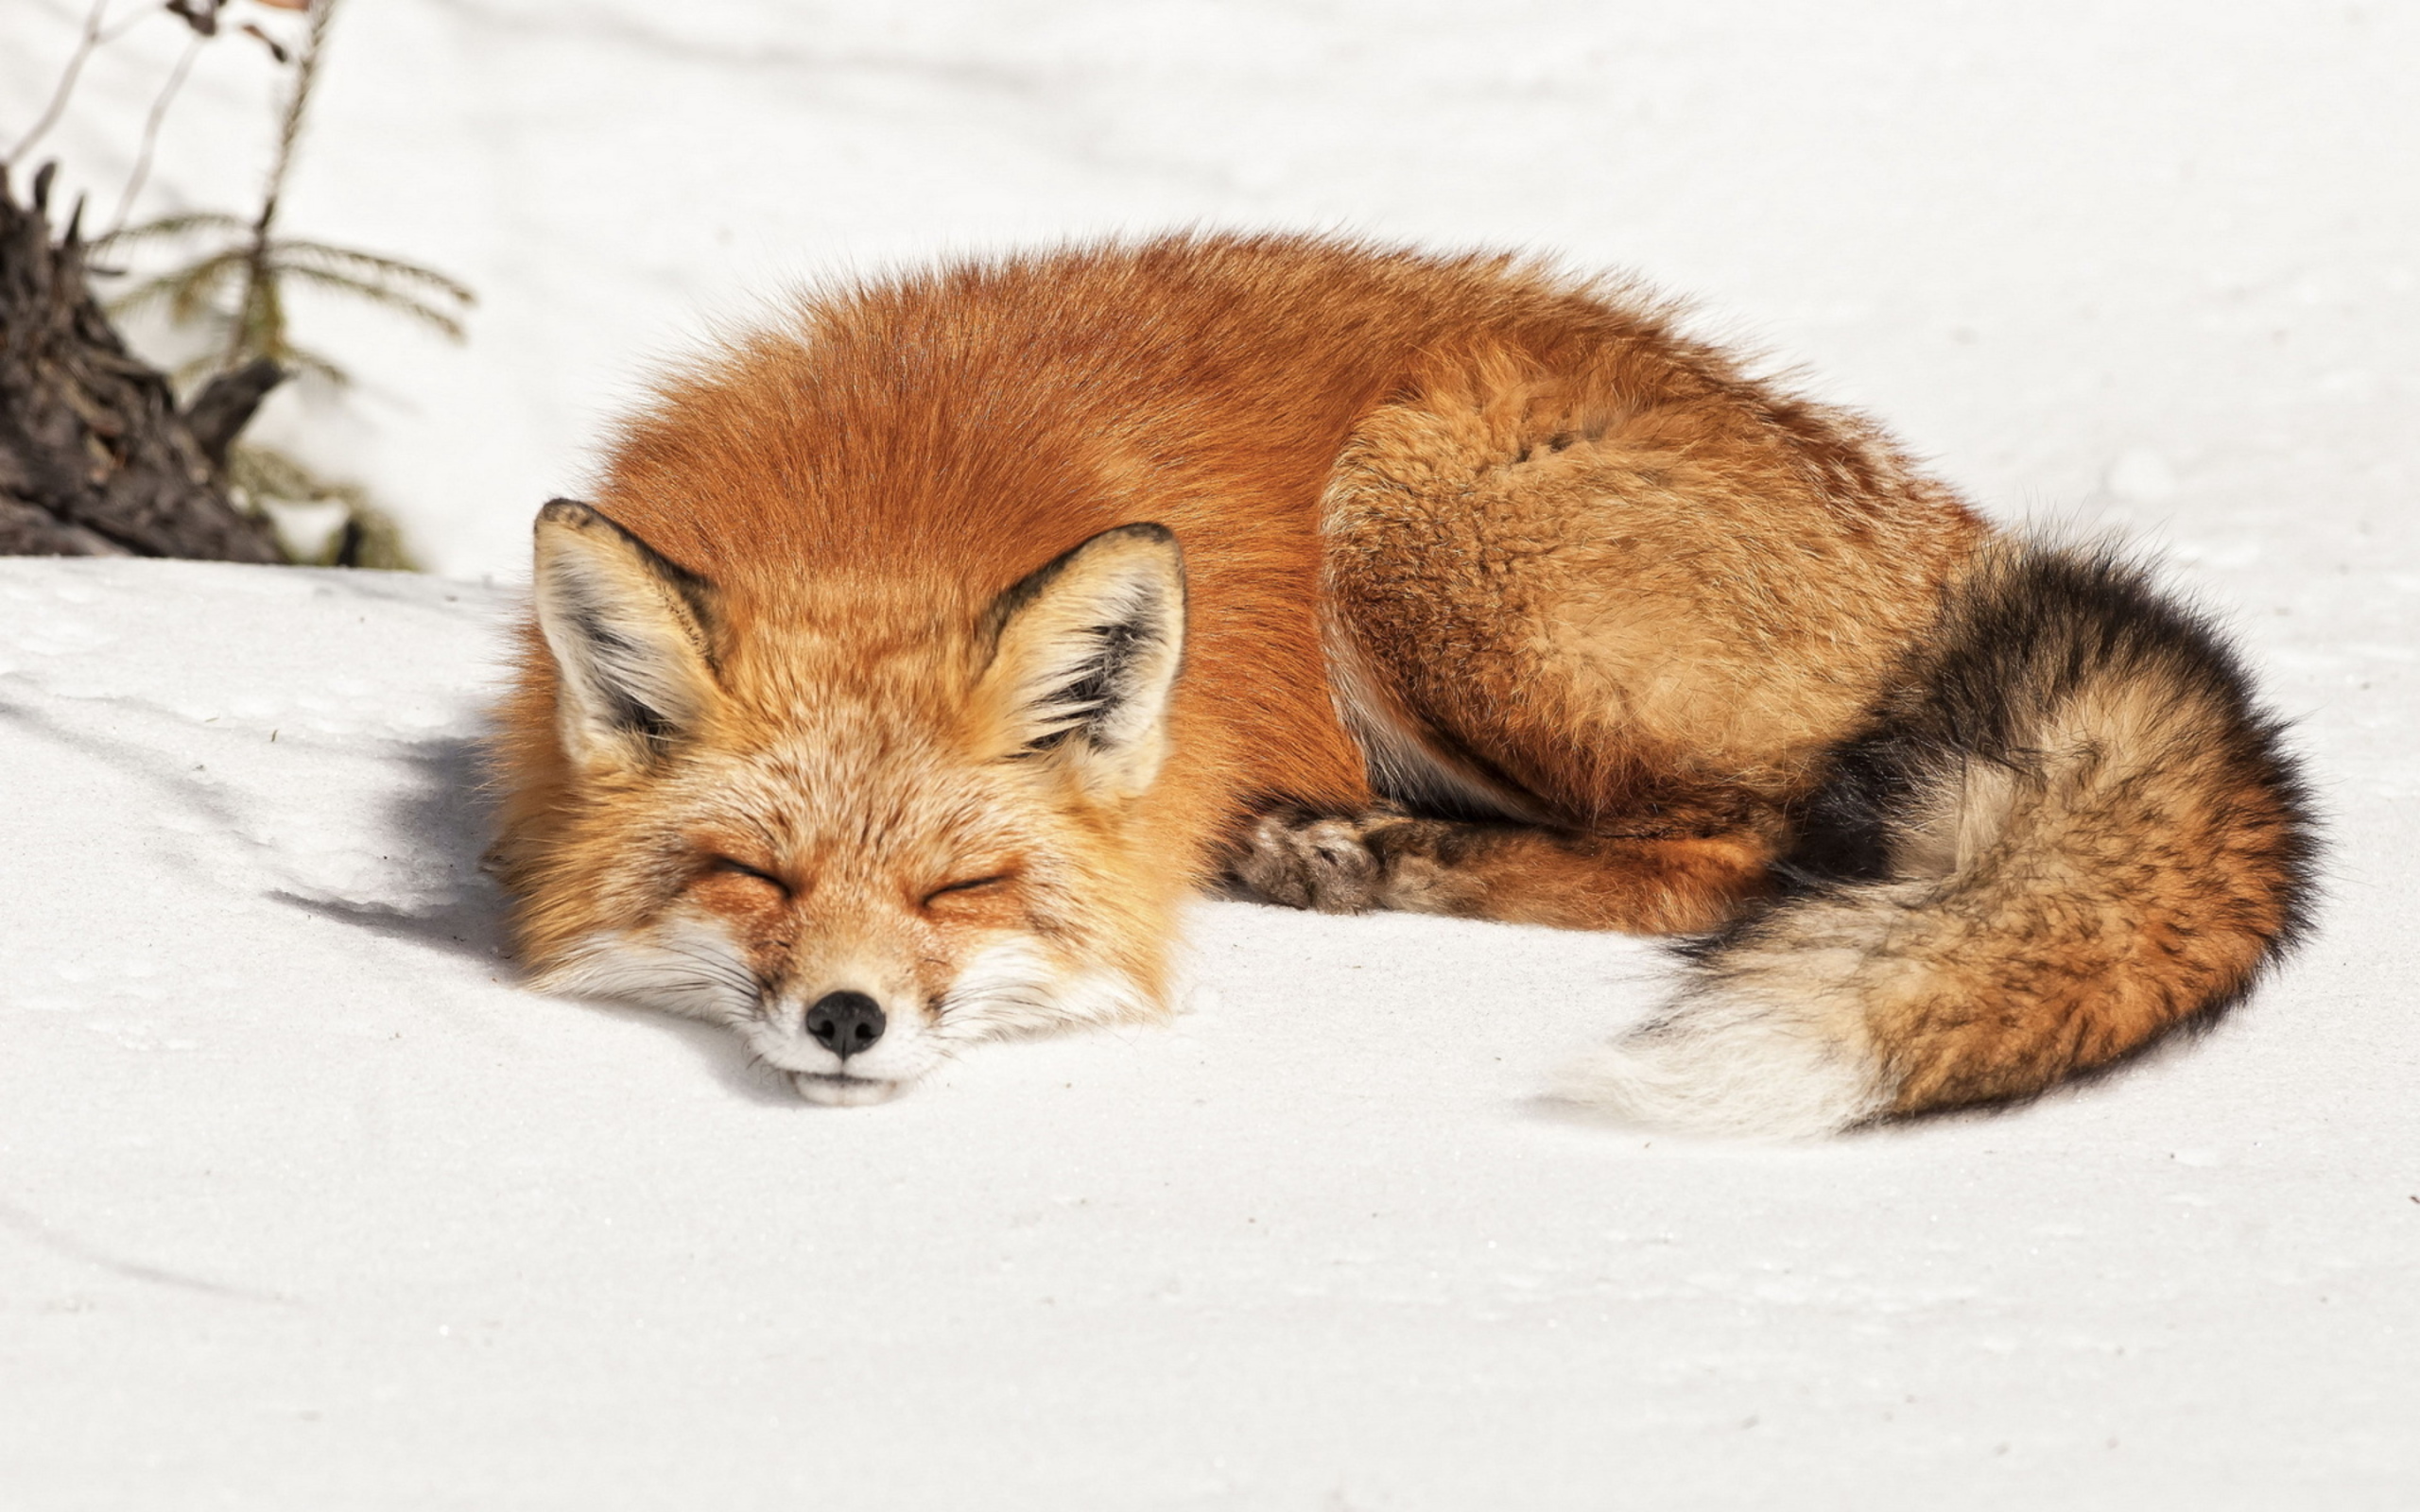 Fluffy red fox sleeps in the cold snow.